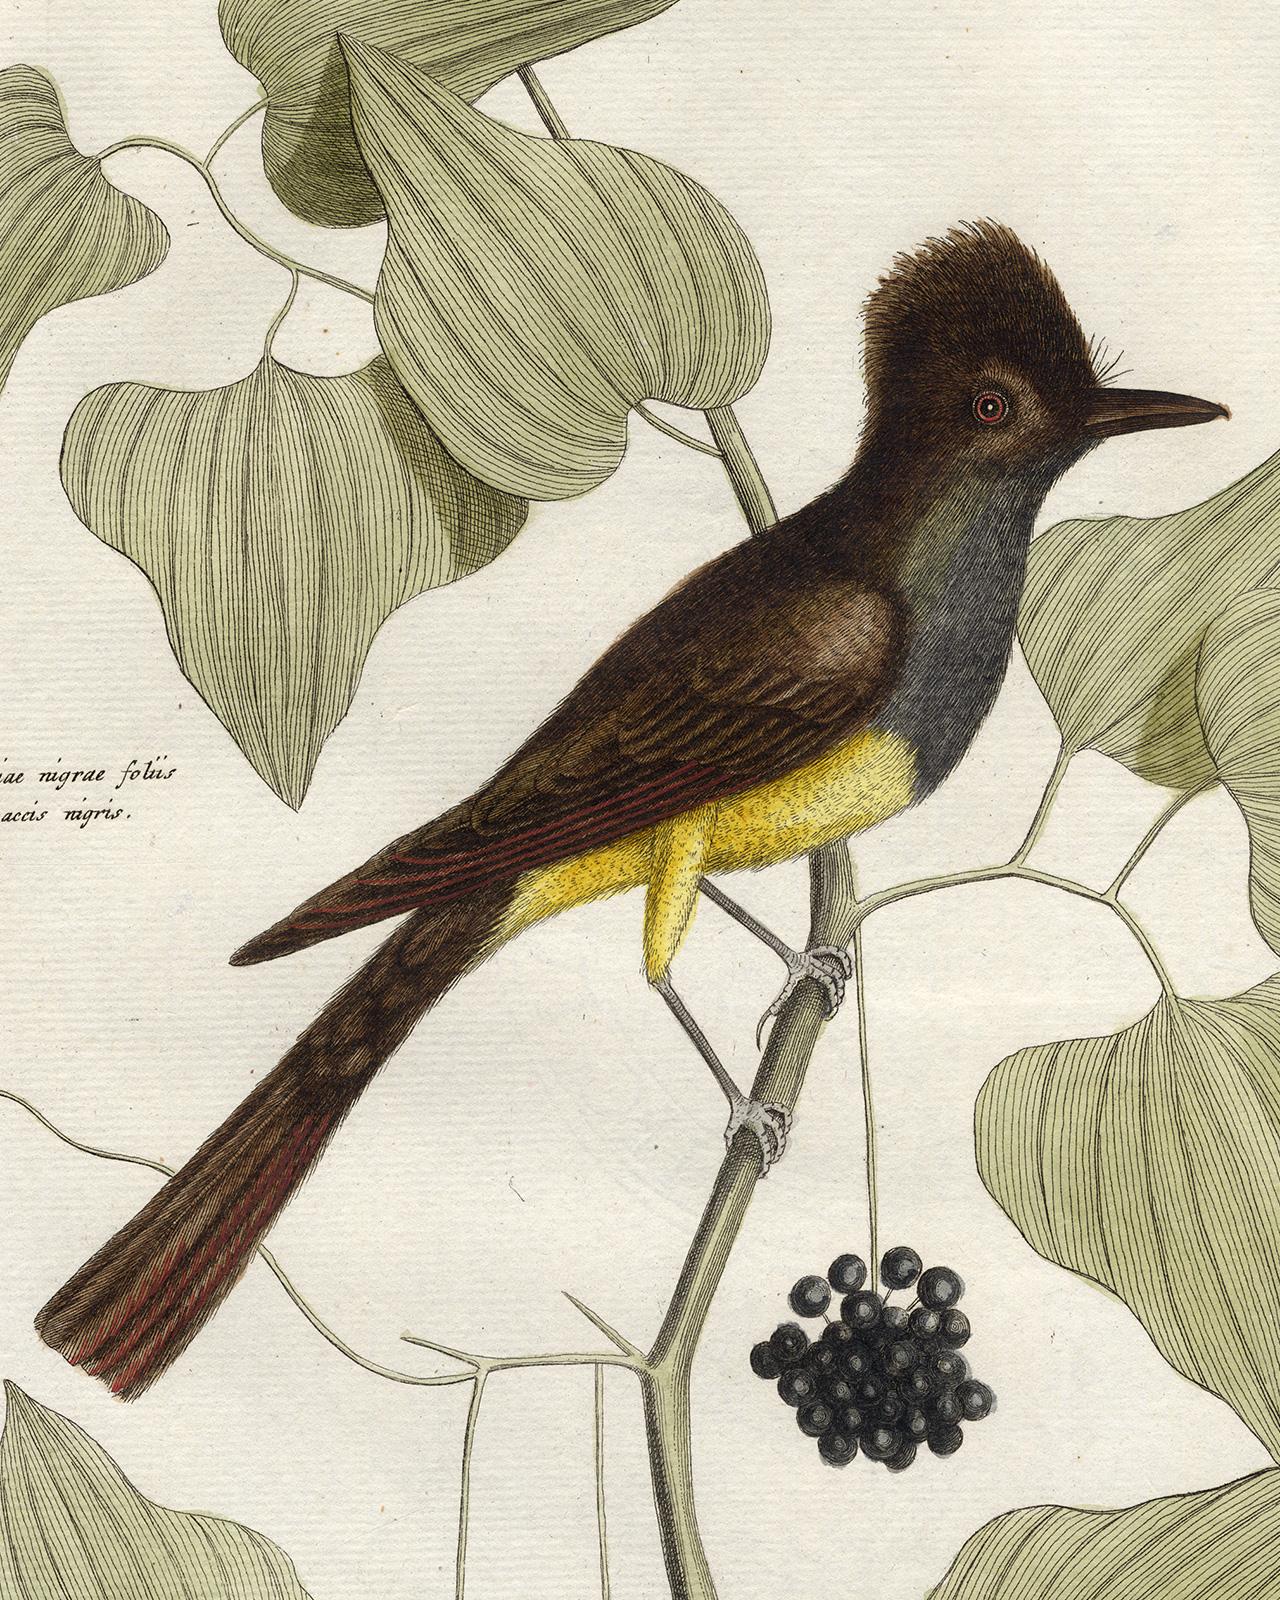 Yellow-Bellied Crested Flycatcher by Seligmann - Handcoloured - 18th century - Old Masters Print by Johann Michael Seligmann